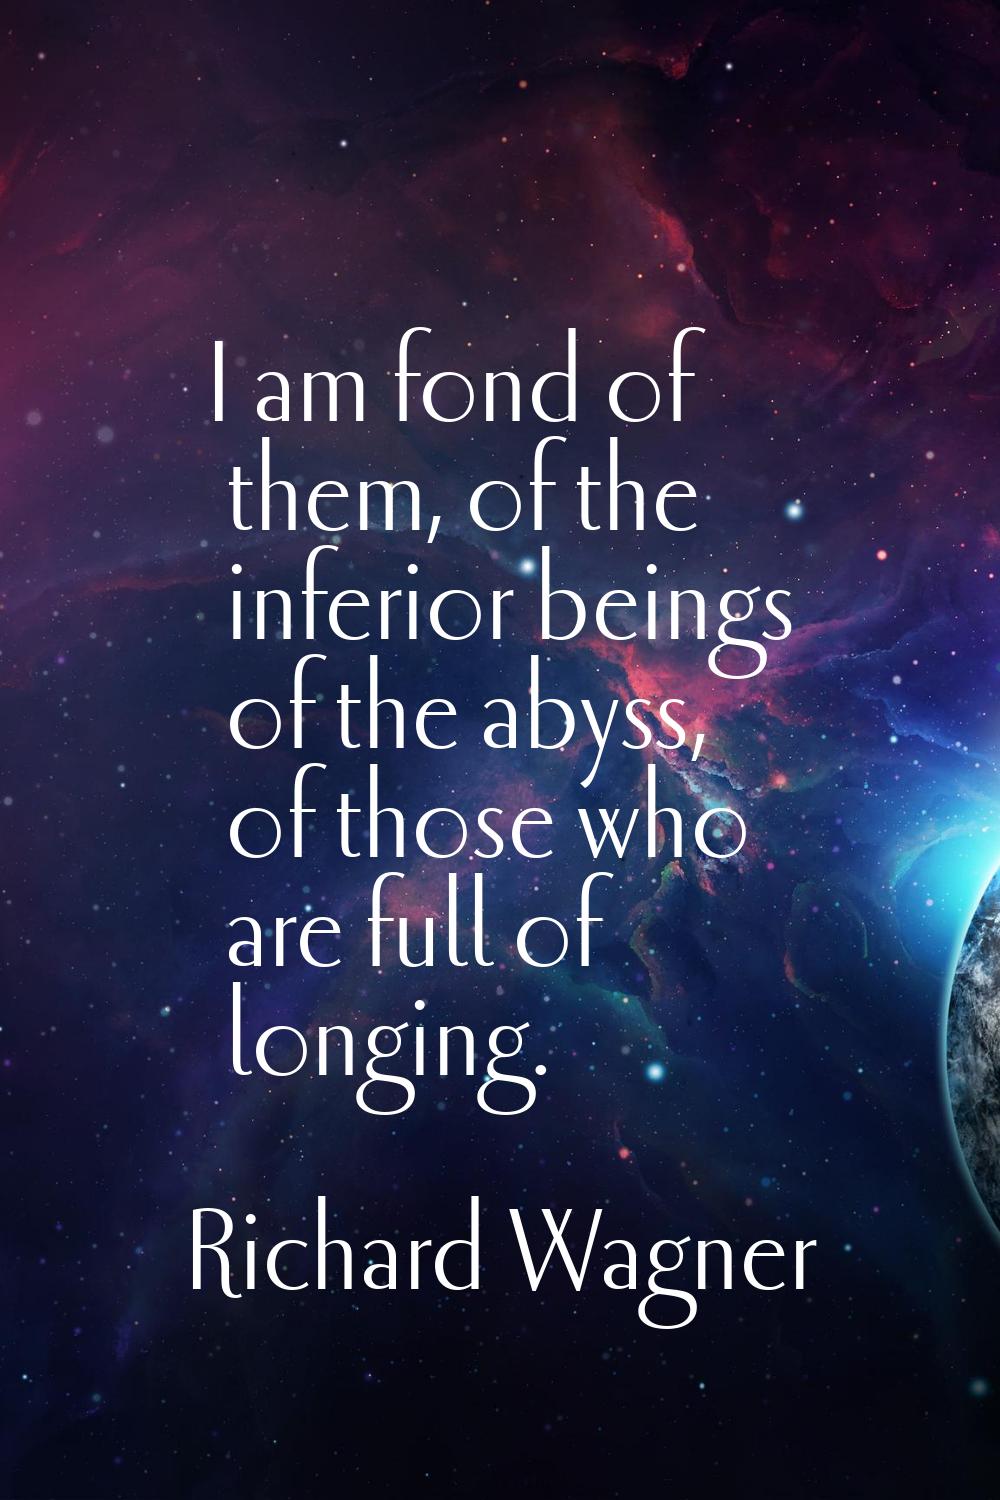 I am fond of them, of the inferior beings of the abyss, of those who are full of longing.